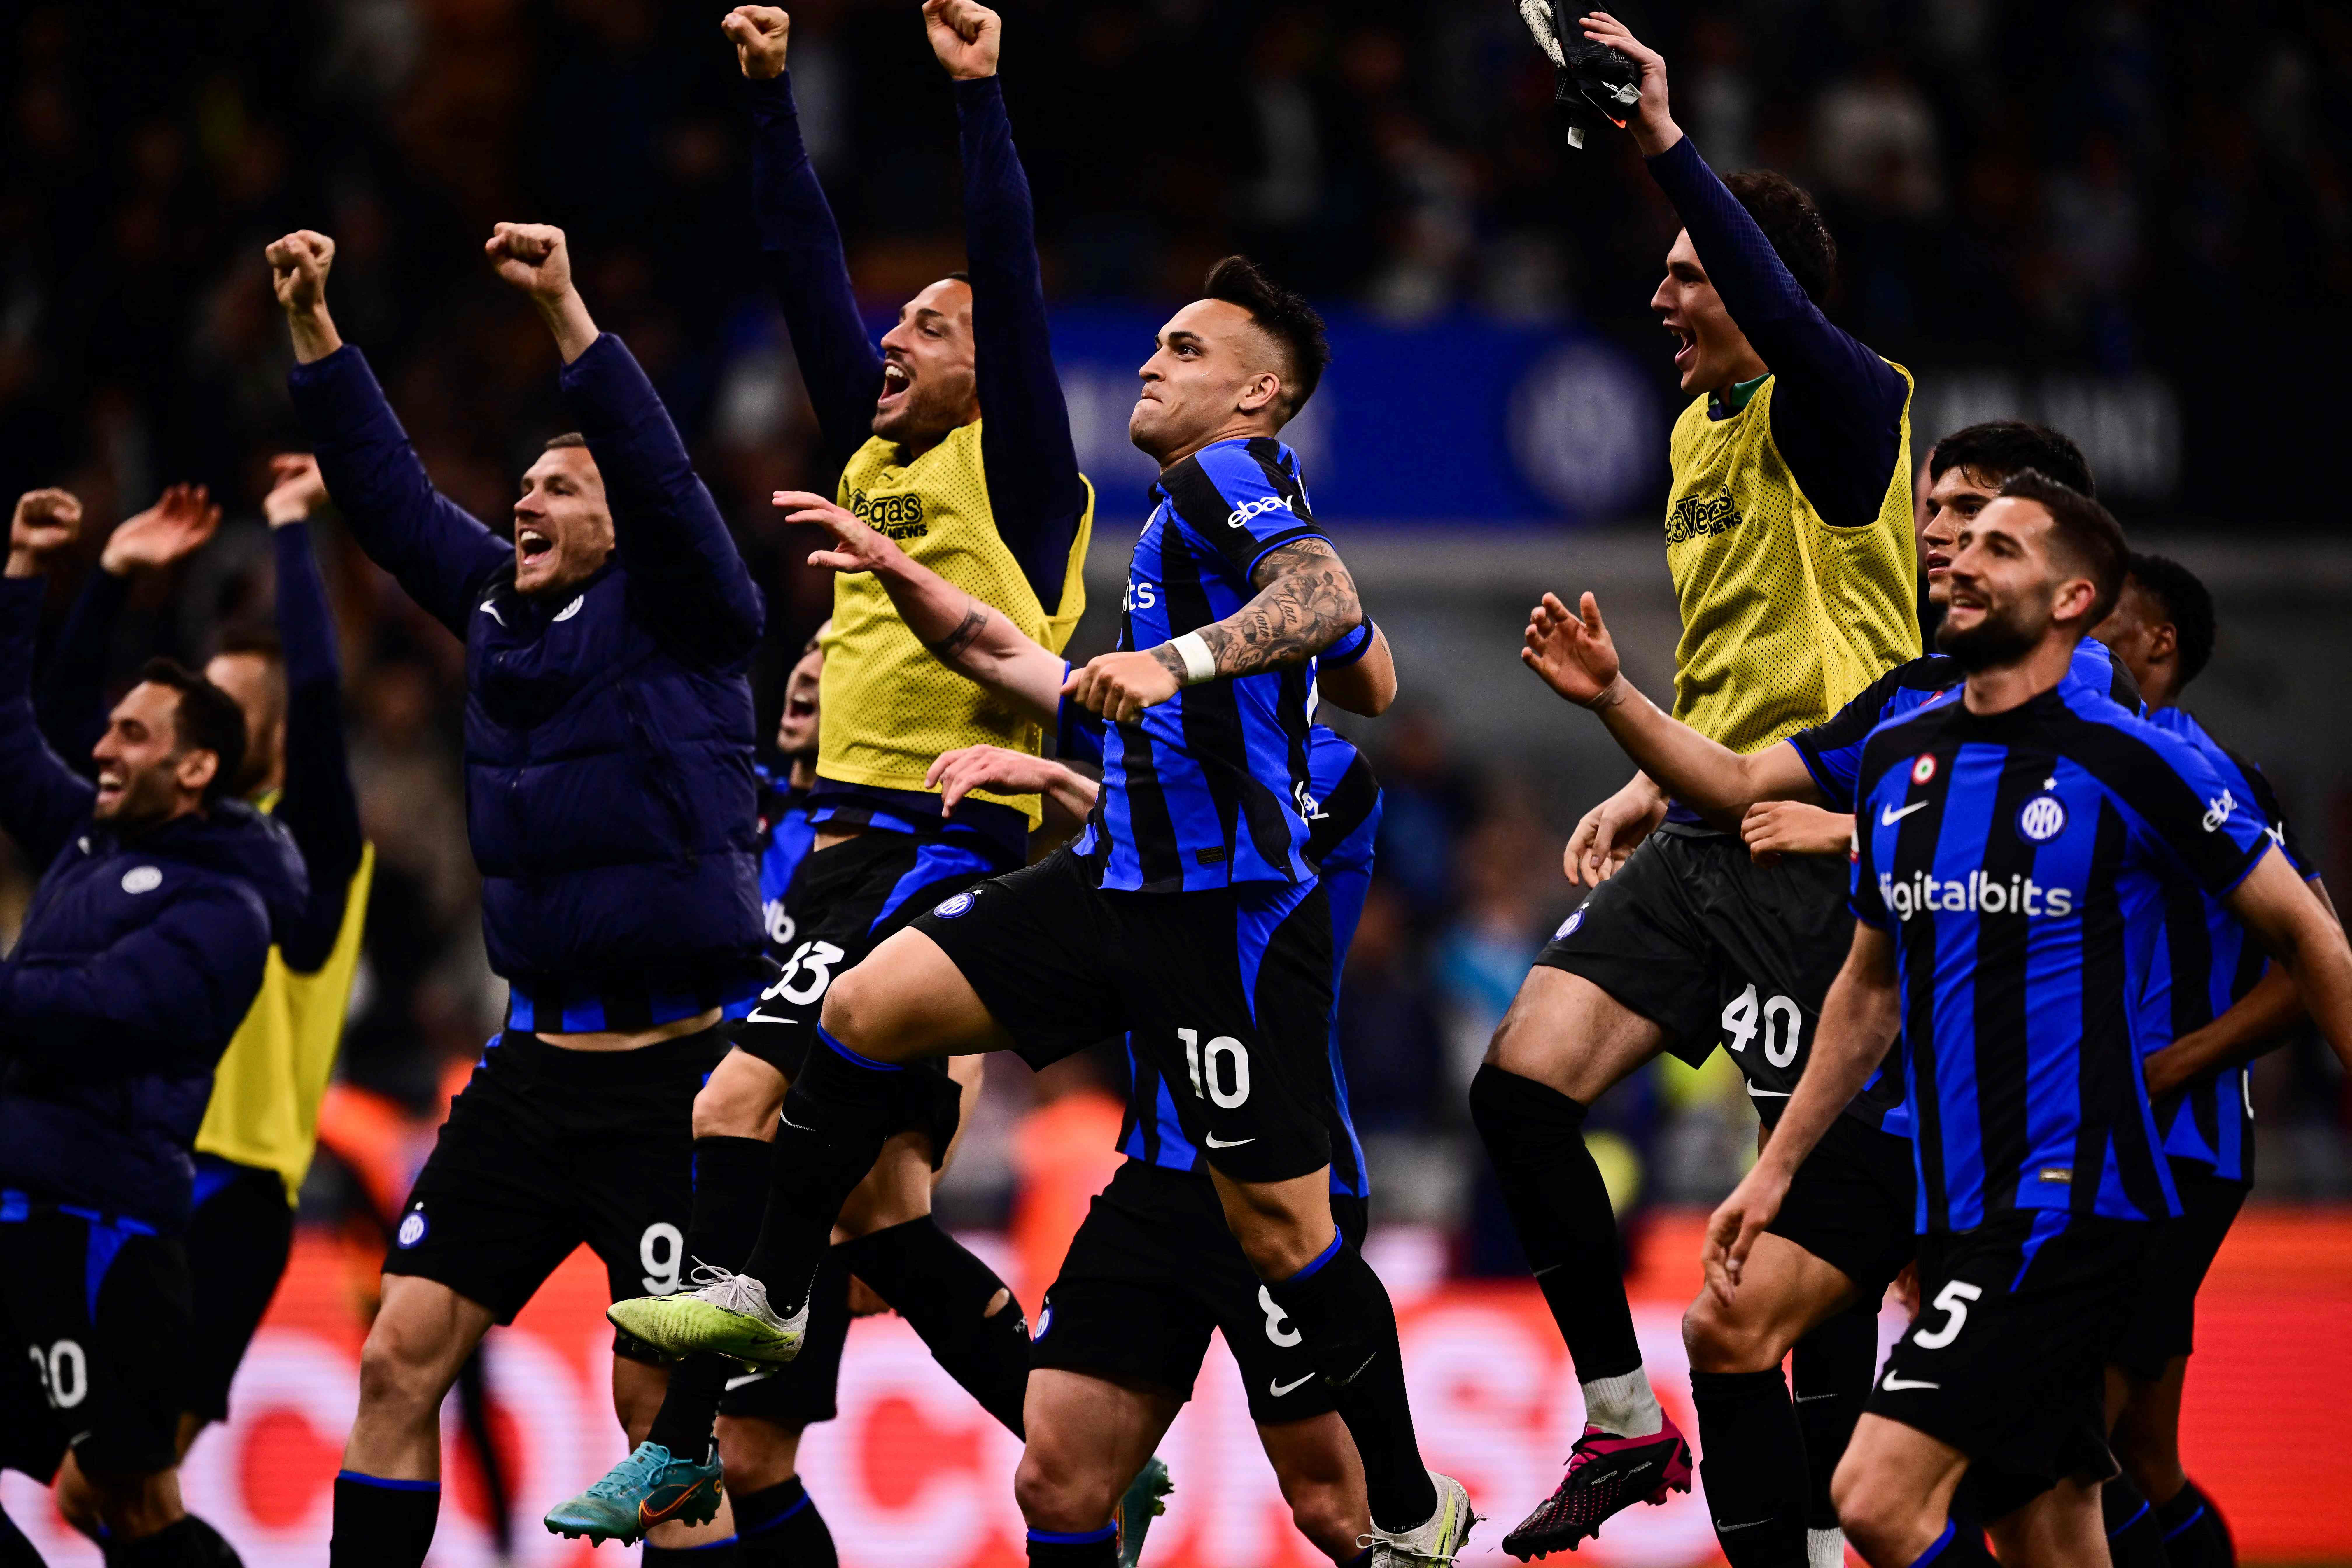 Inter see off Juve to reach Italian Cup final